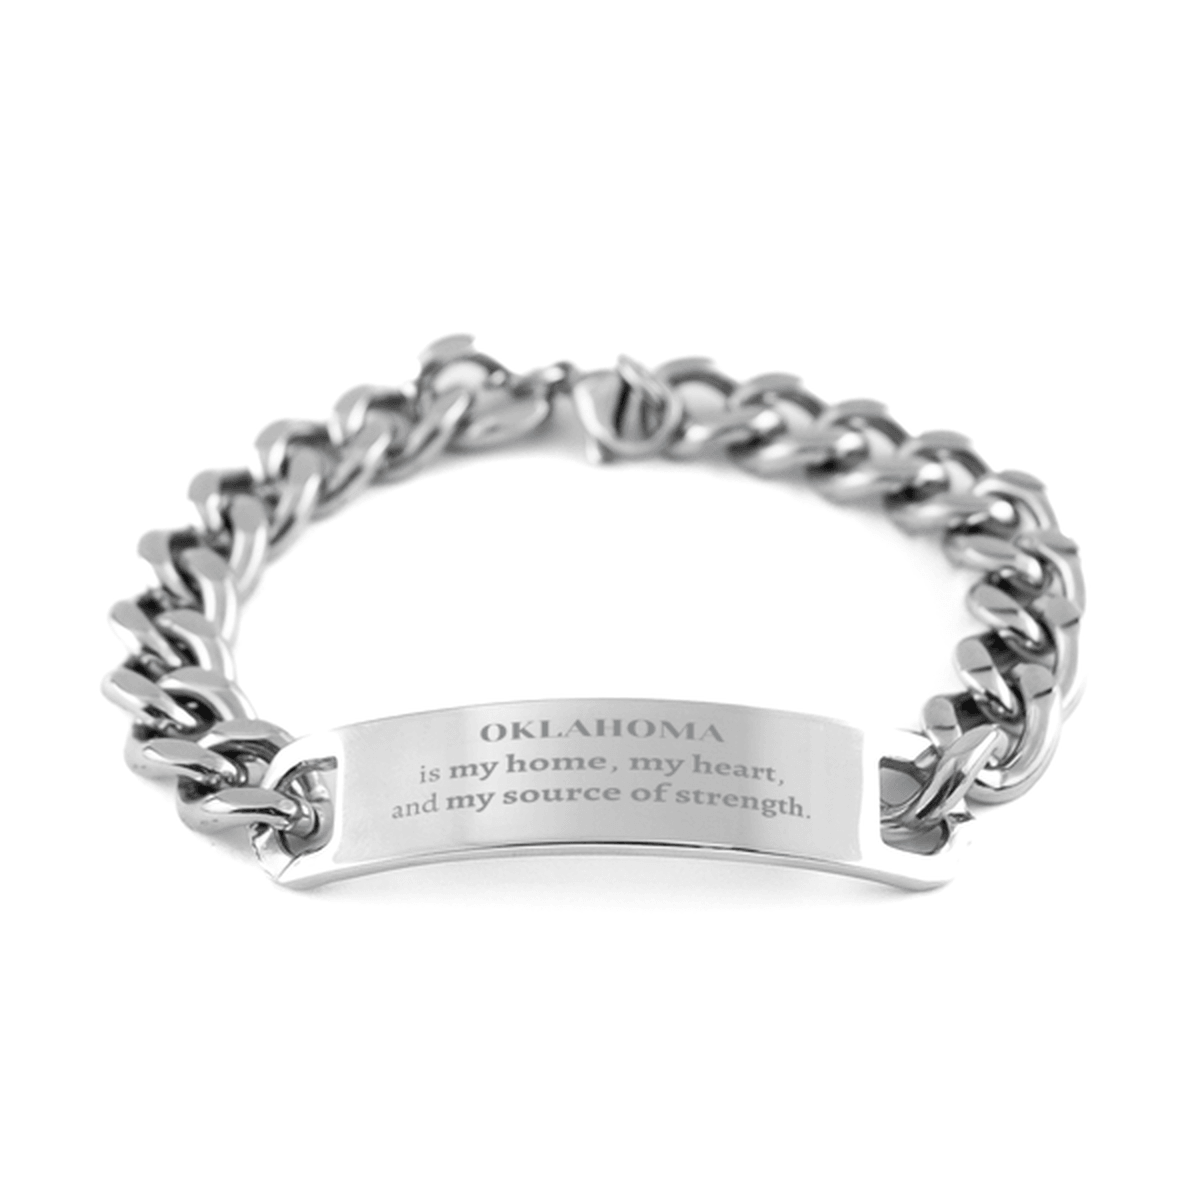 Oklahoma is my home Gifts, Lovely Oklahoma Birthday Christmas Cuban Chain Stainless Steel Bracelet For People from Oklahoma, Men, Women, Friends - Mallard Moon Gift Shop